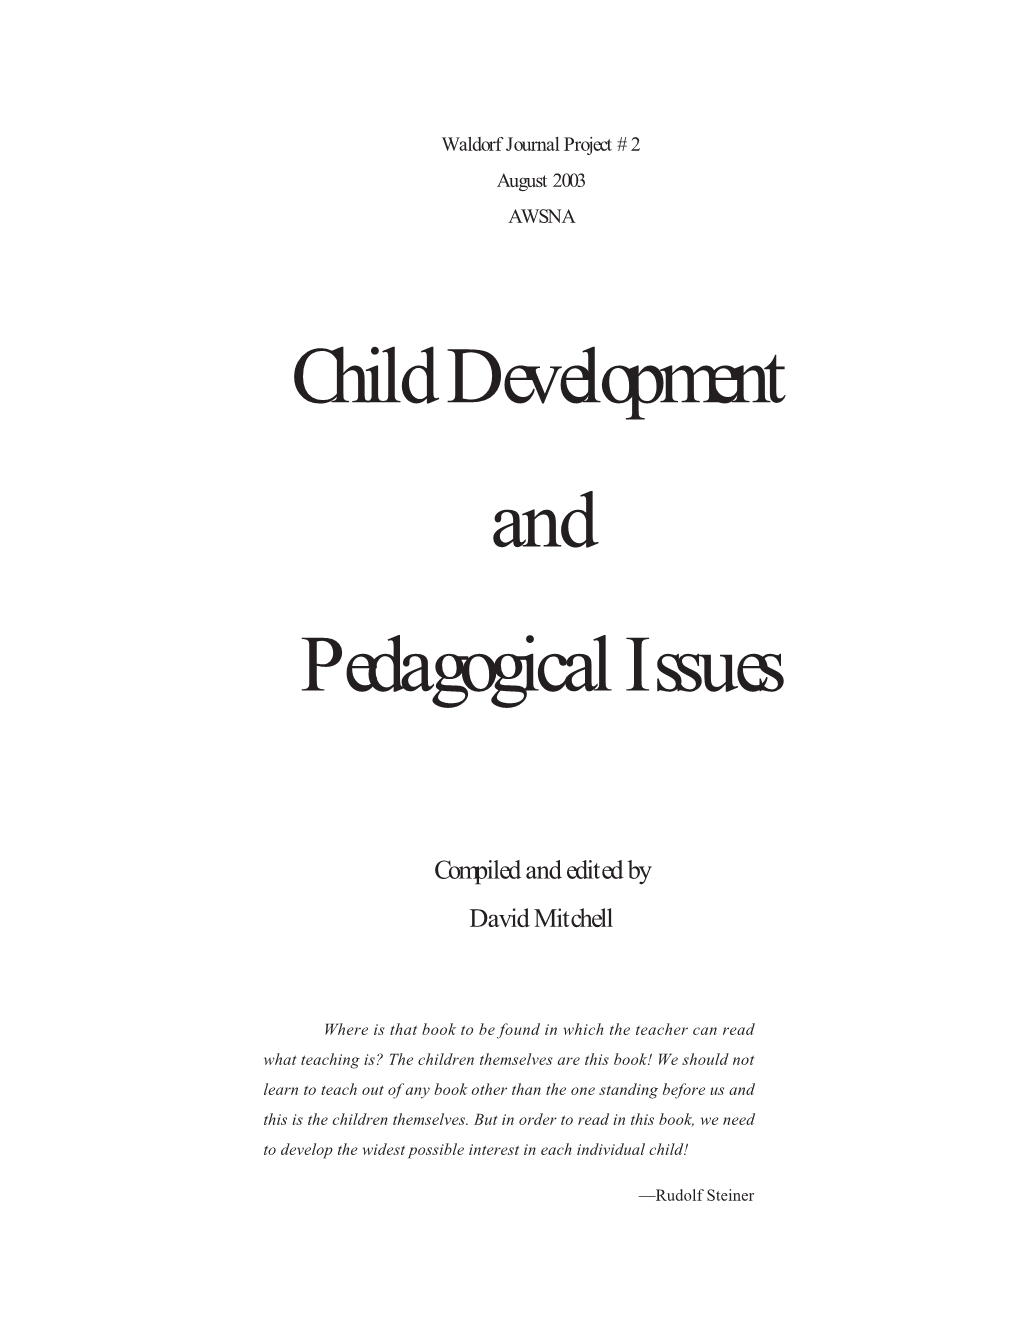 Child Development and Pedagogical Issues